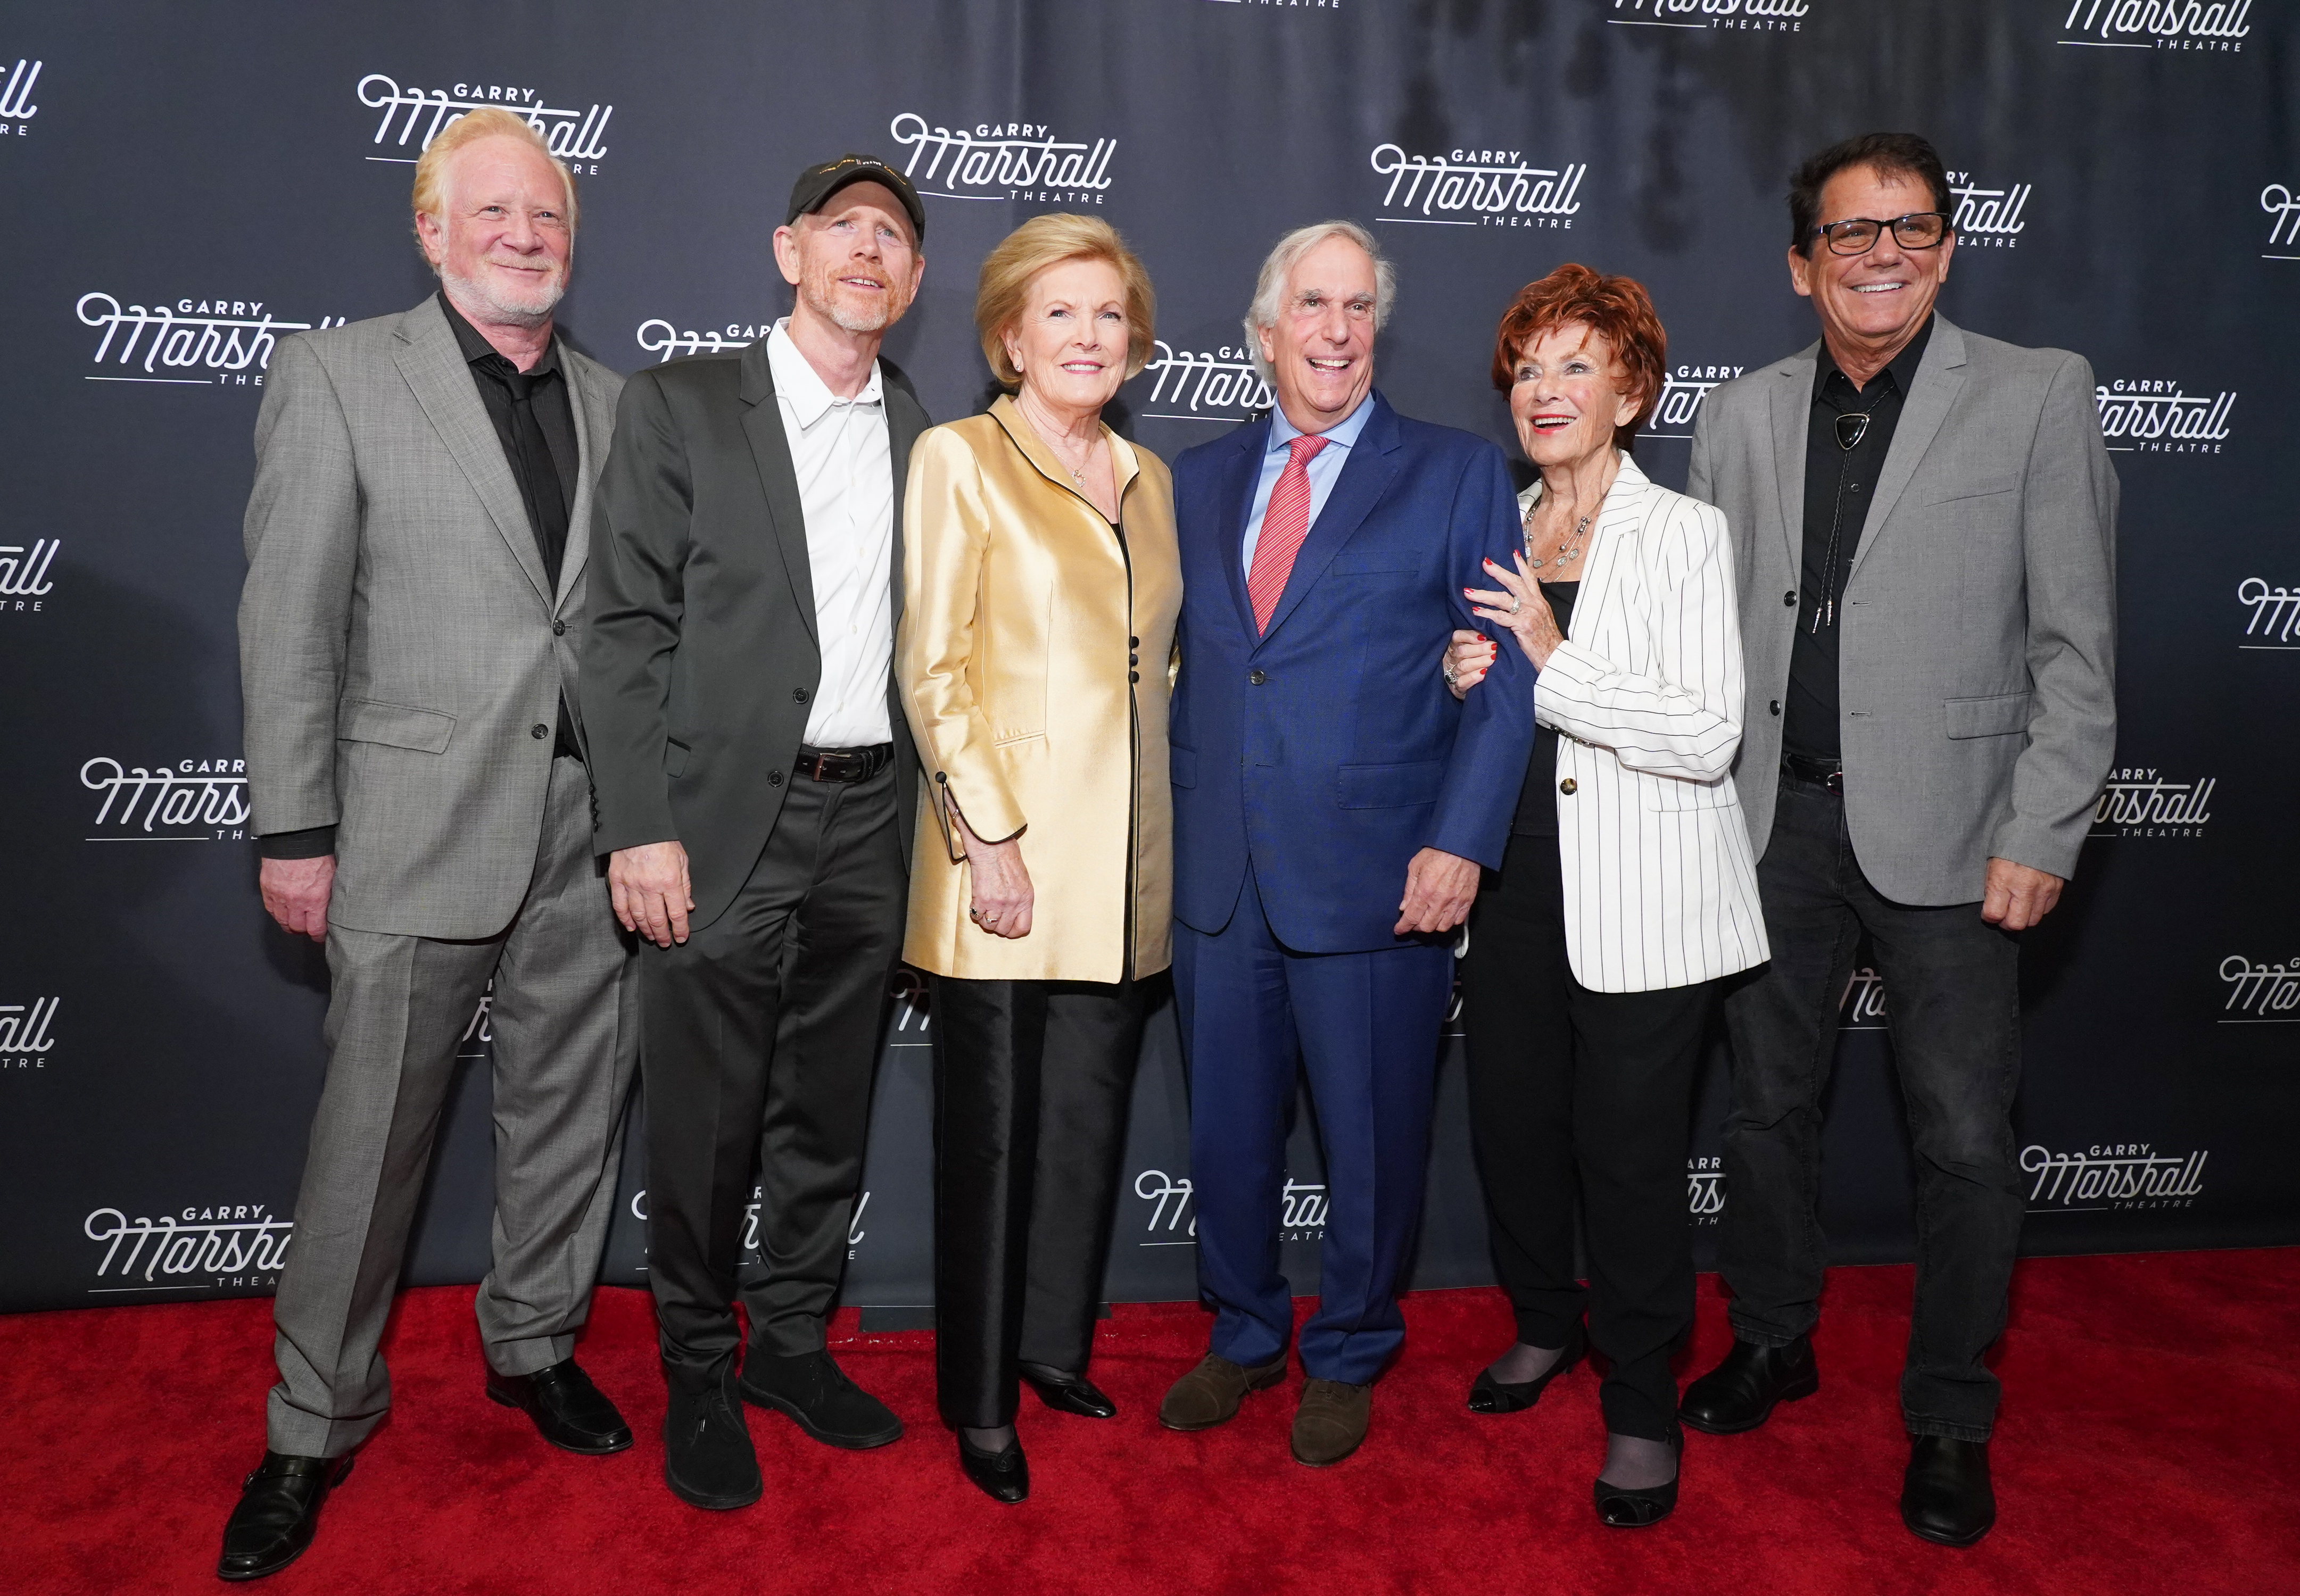 Don Most, Ron Howard, Barbara Marshall, Henry Winkler, Marion Ross and Anson Williams at Garry Marshall Theatre's 3rd Annual Founder's Gala Honoring Original "Happy Days" Cast | Source: Getty Images